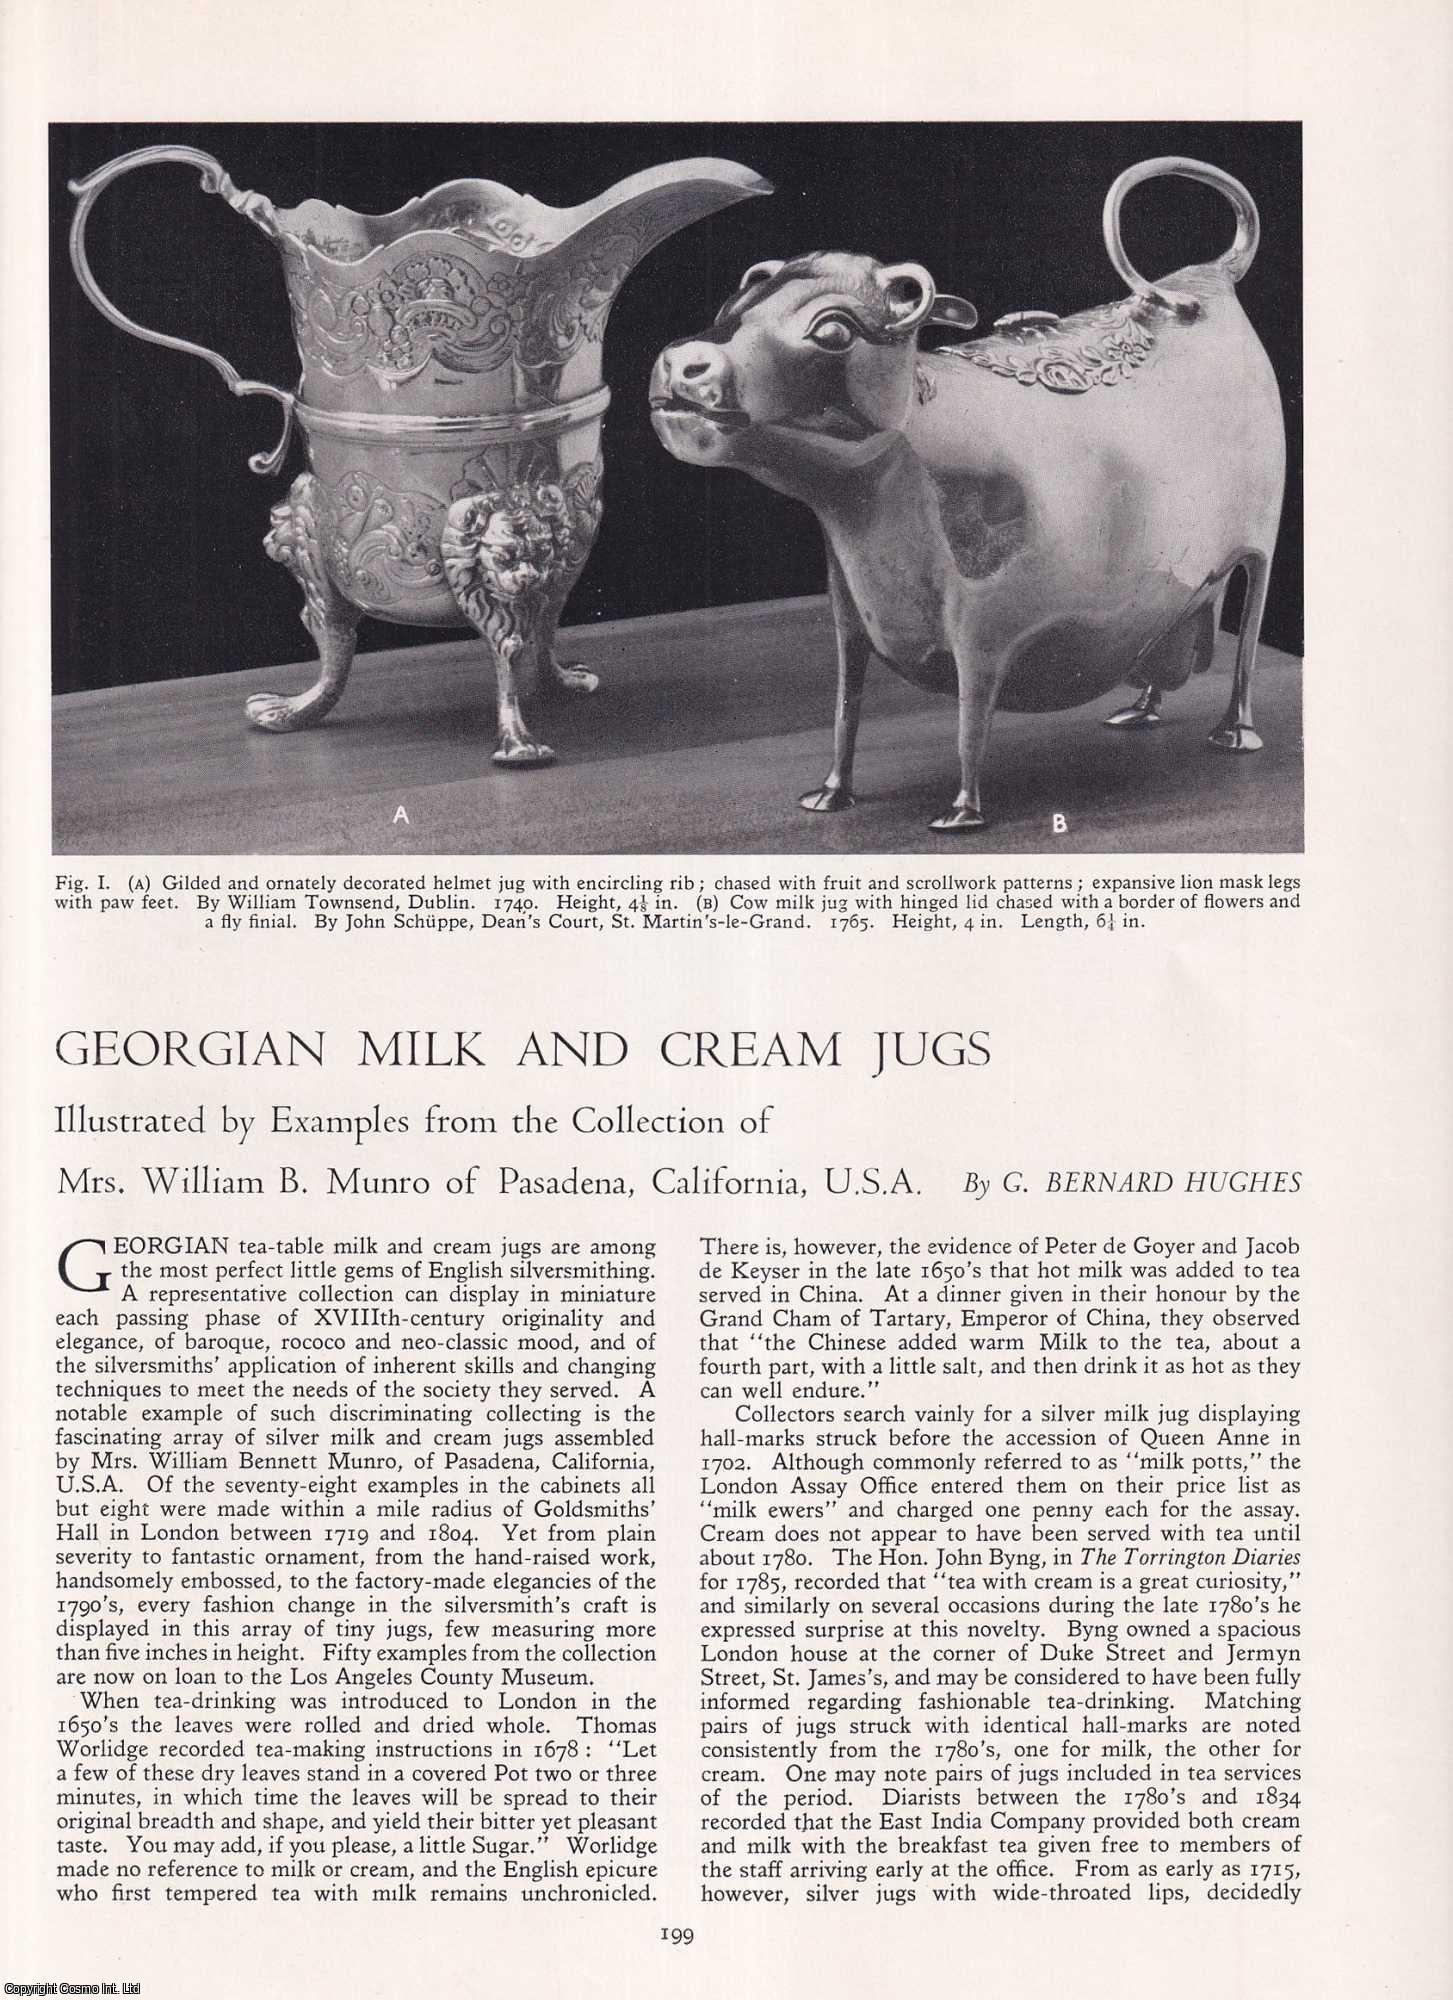 G. Bernard Hughes - Georgian Milk and Cream Jugs: With Examples from the Collection of Mrs William B. Munro of California. An original article from Apollo, International Magazine of the Arts, 1956.